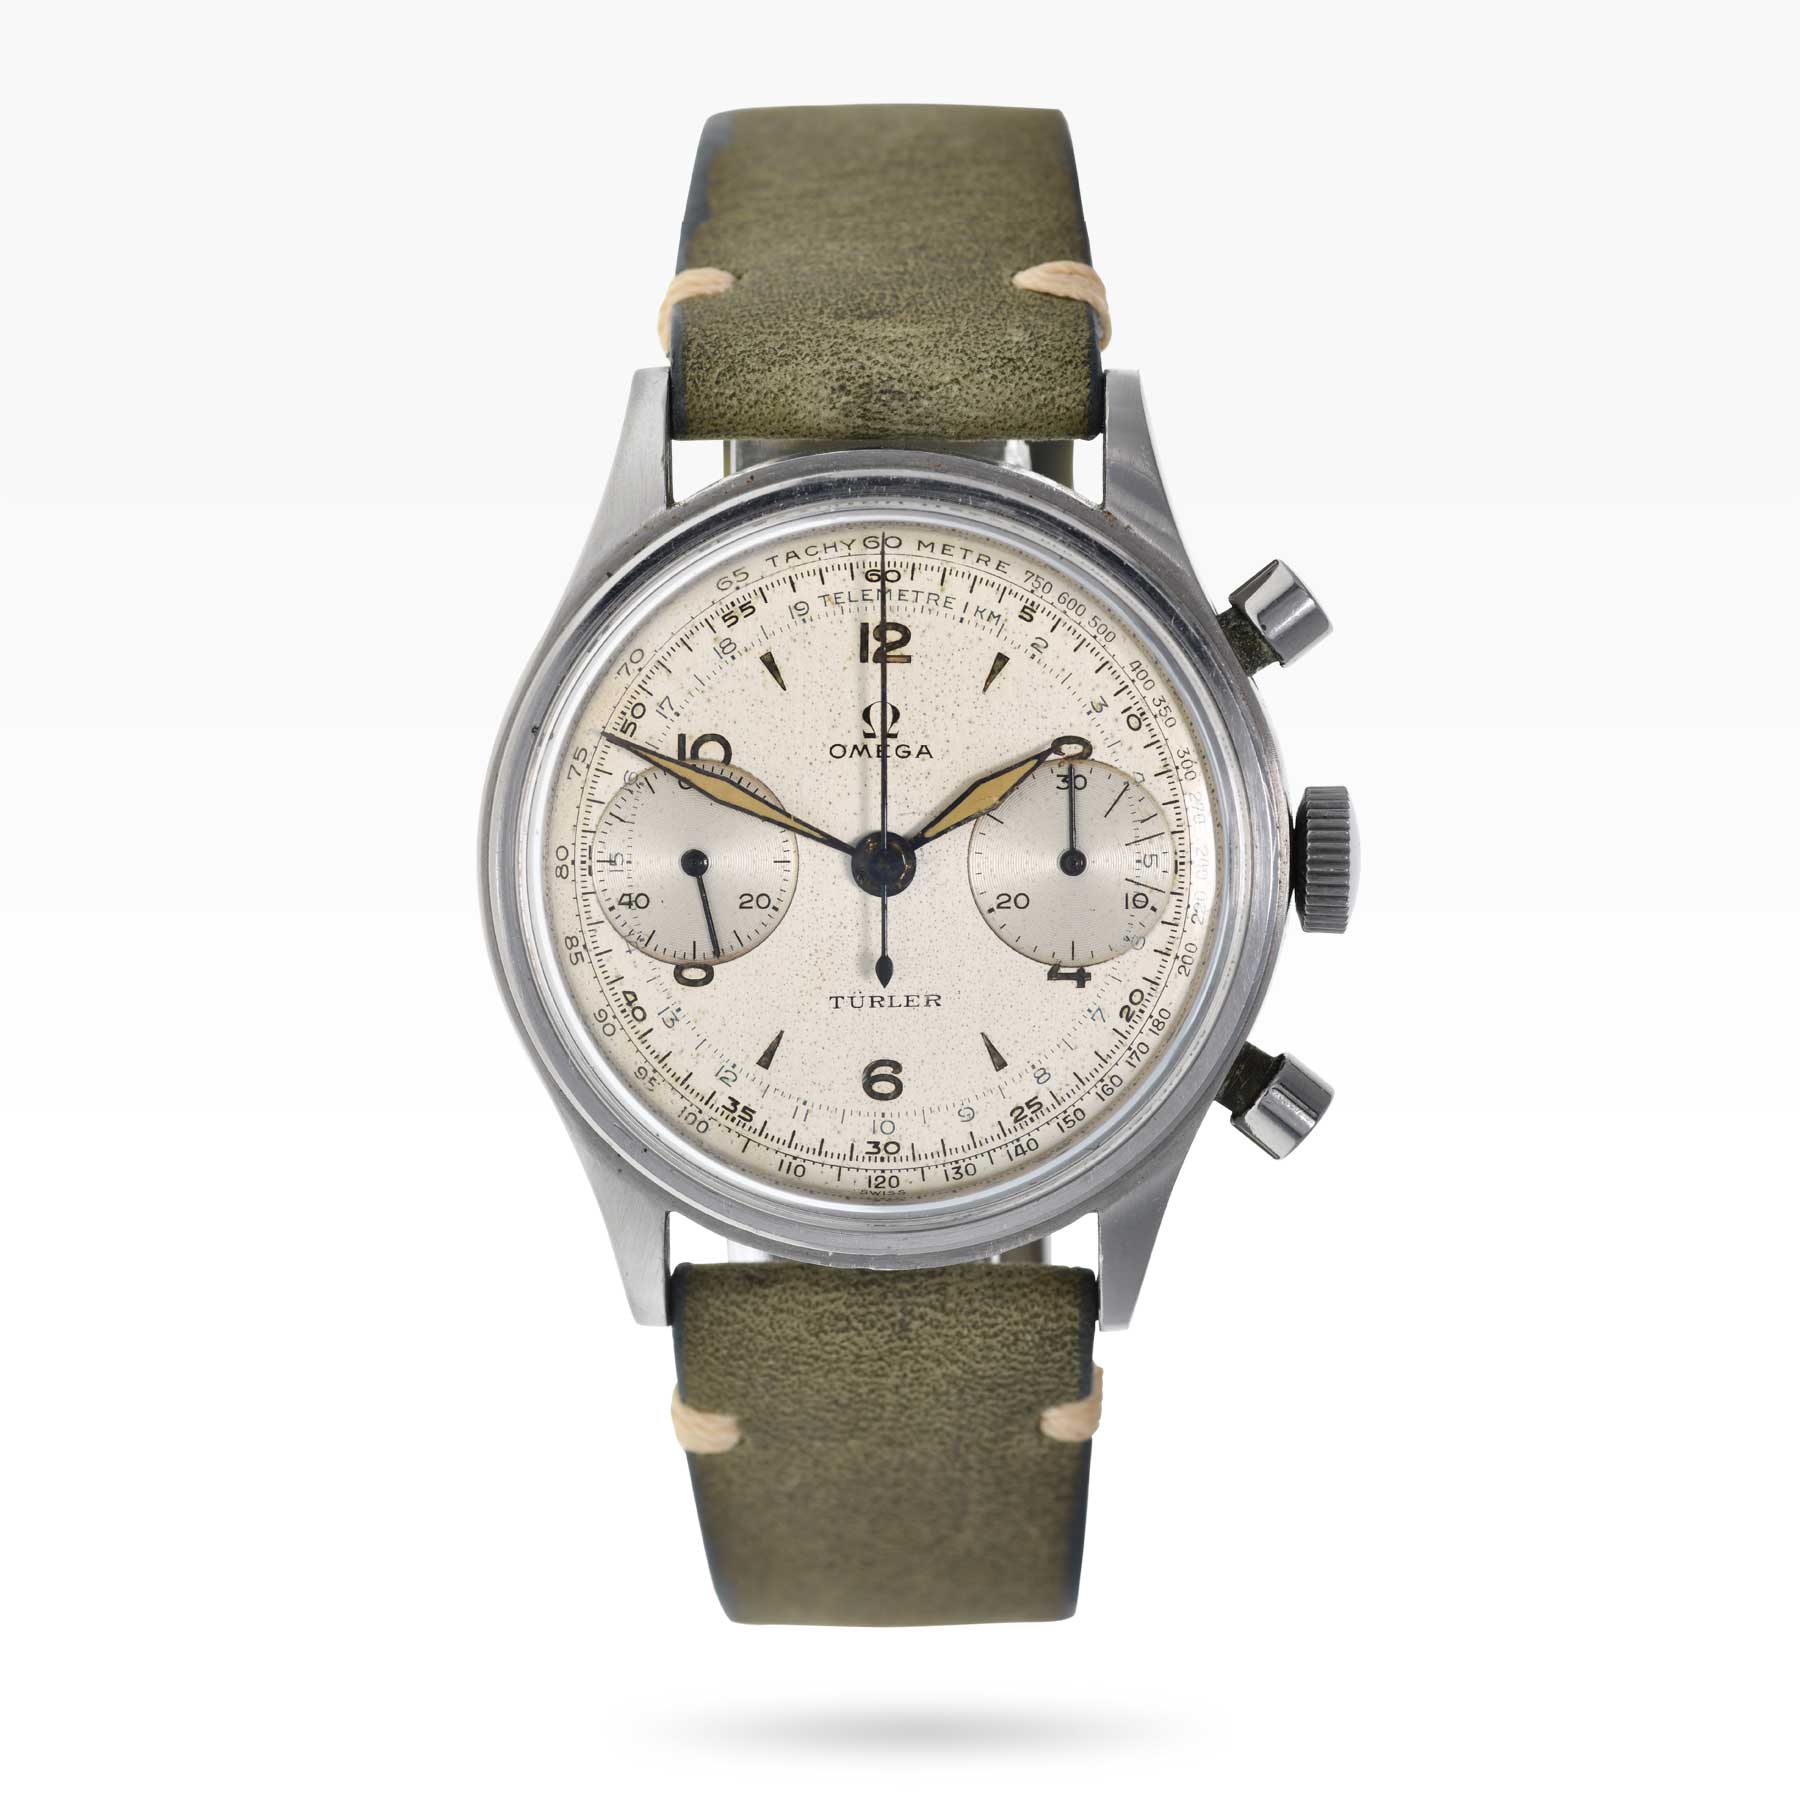 Vintage Omega Ref CK2077 Chronograph from 1950s - 2ToneVintage Watches Singapore